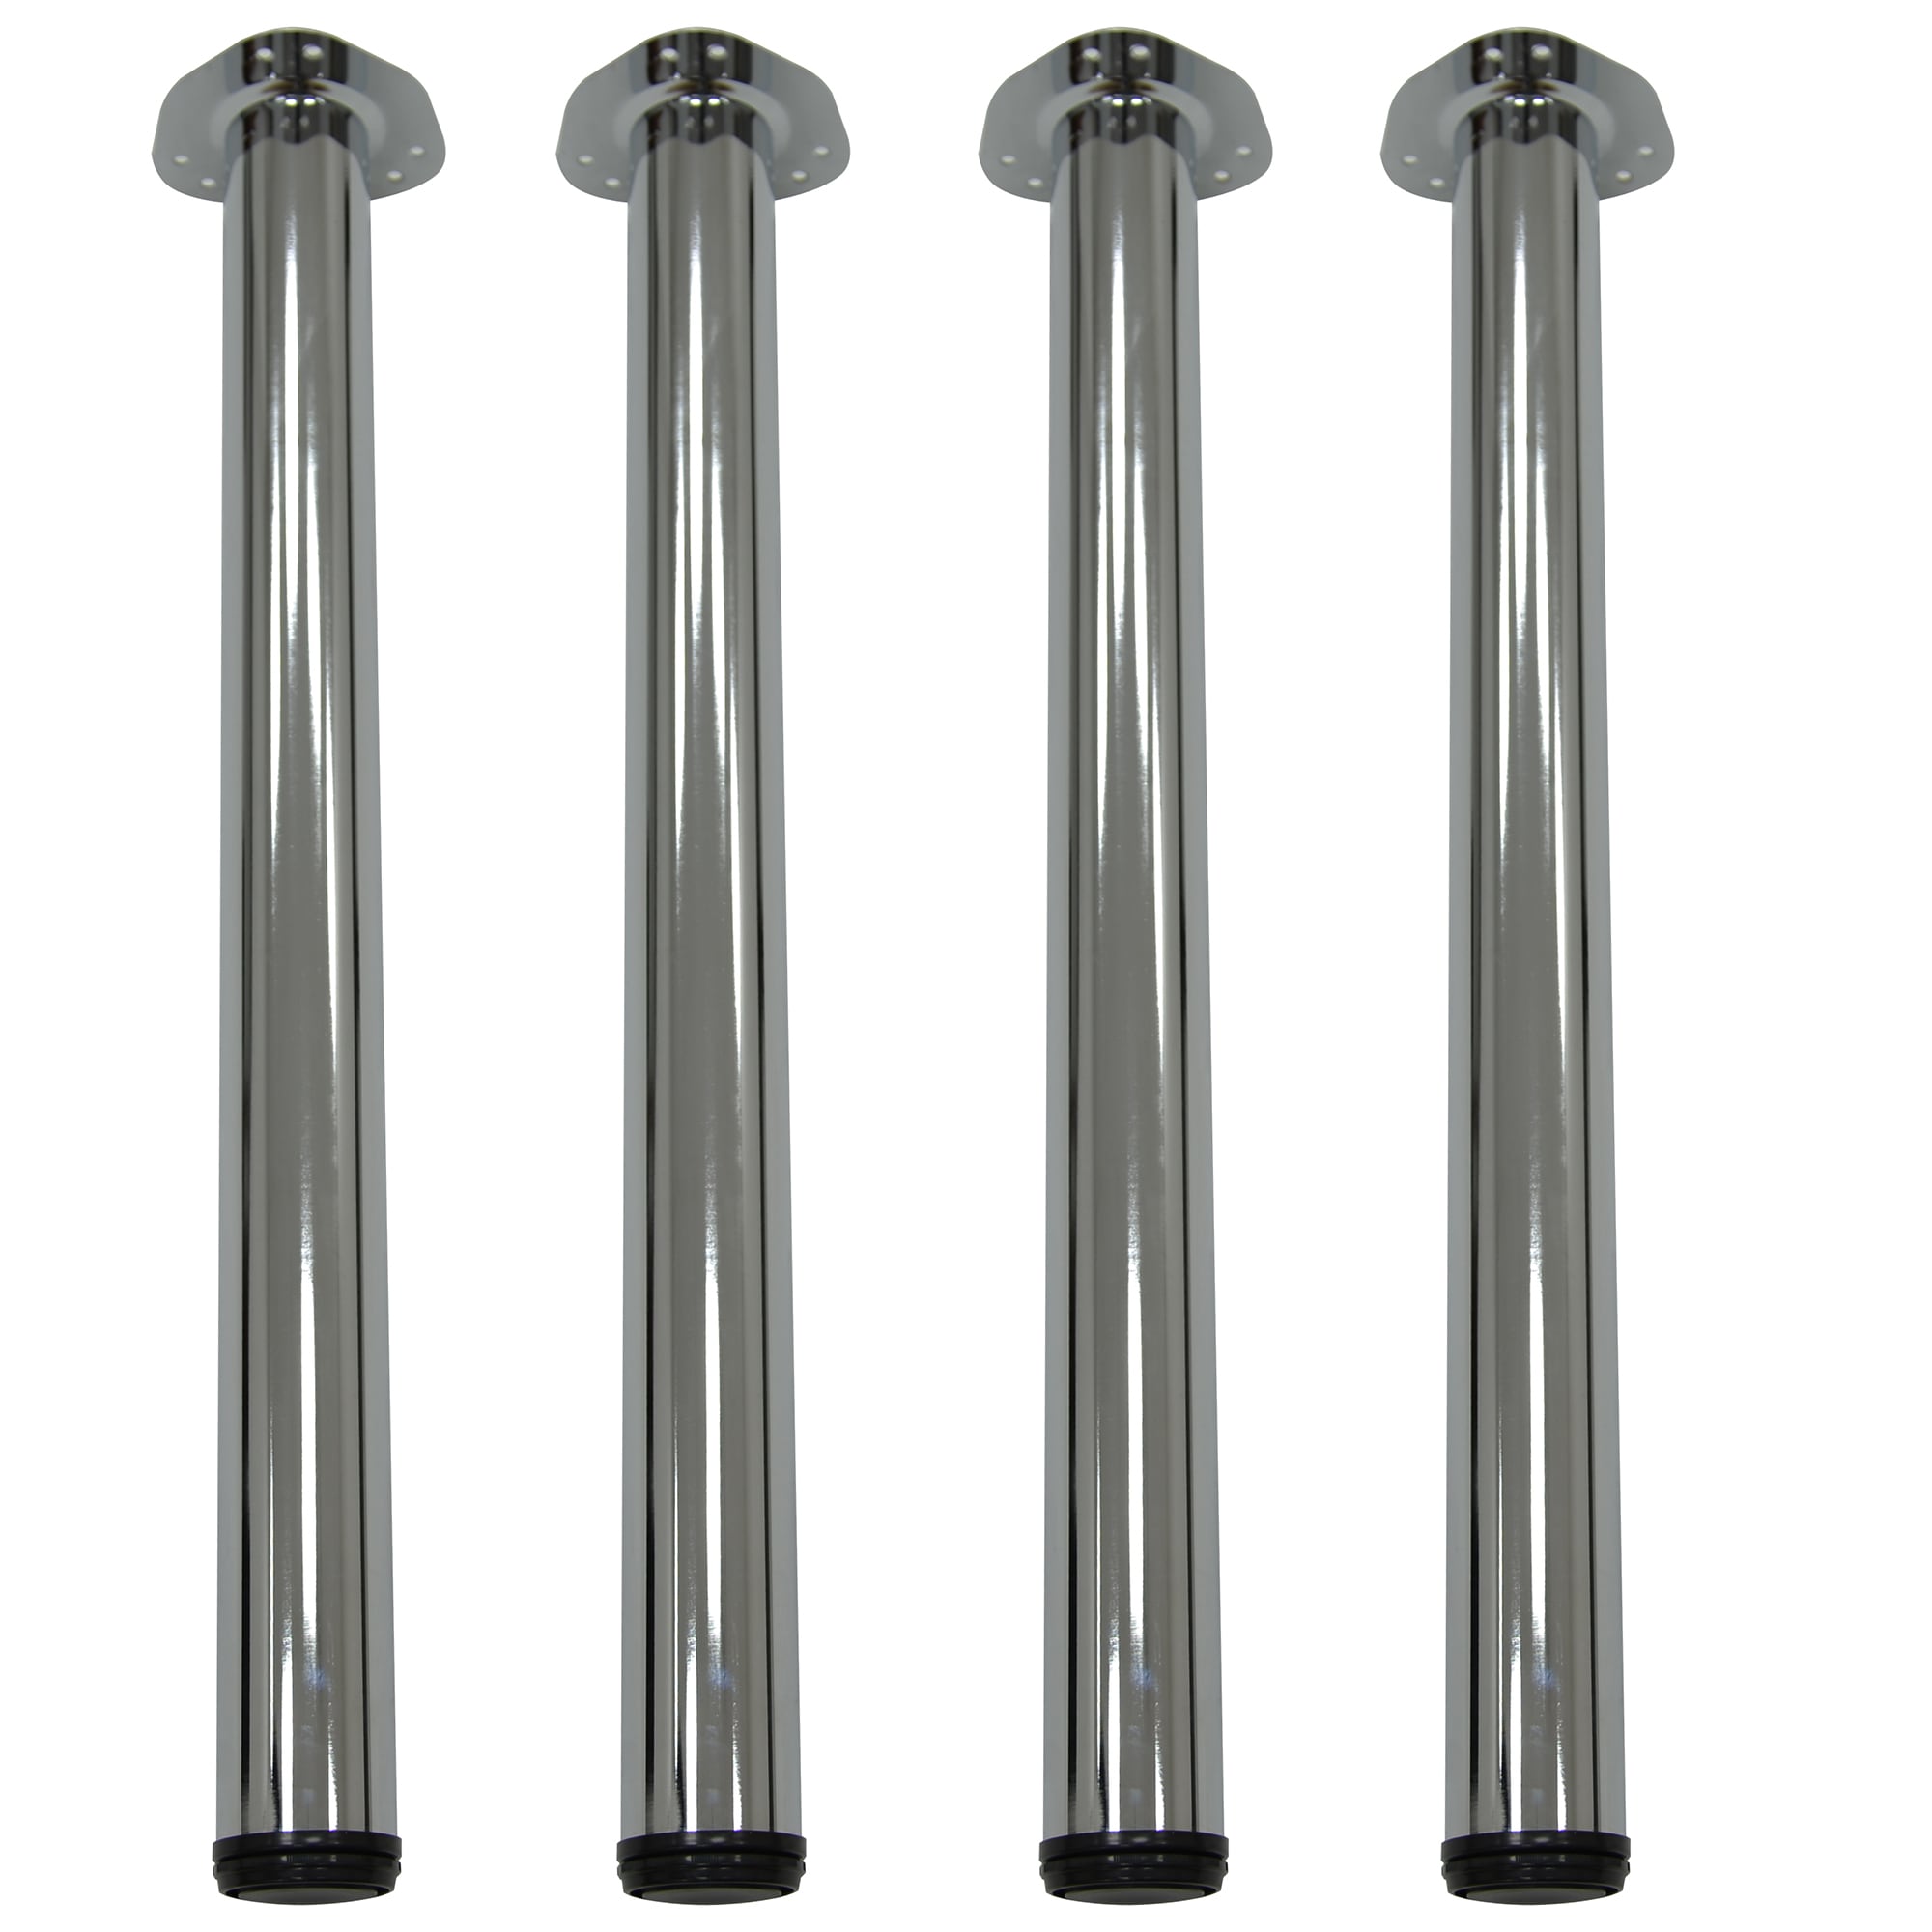 10 Inch Wide Table Legs at Lowes.com